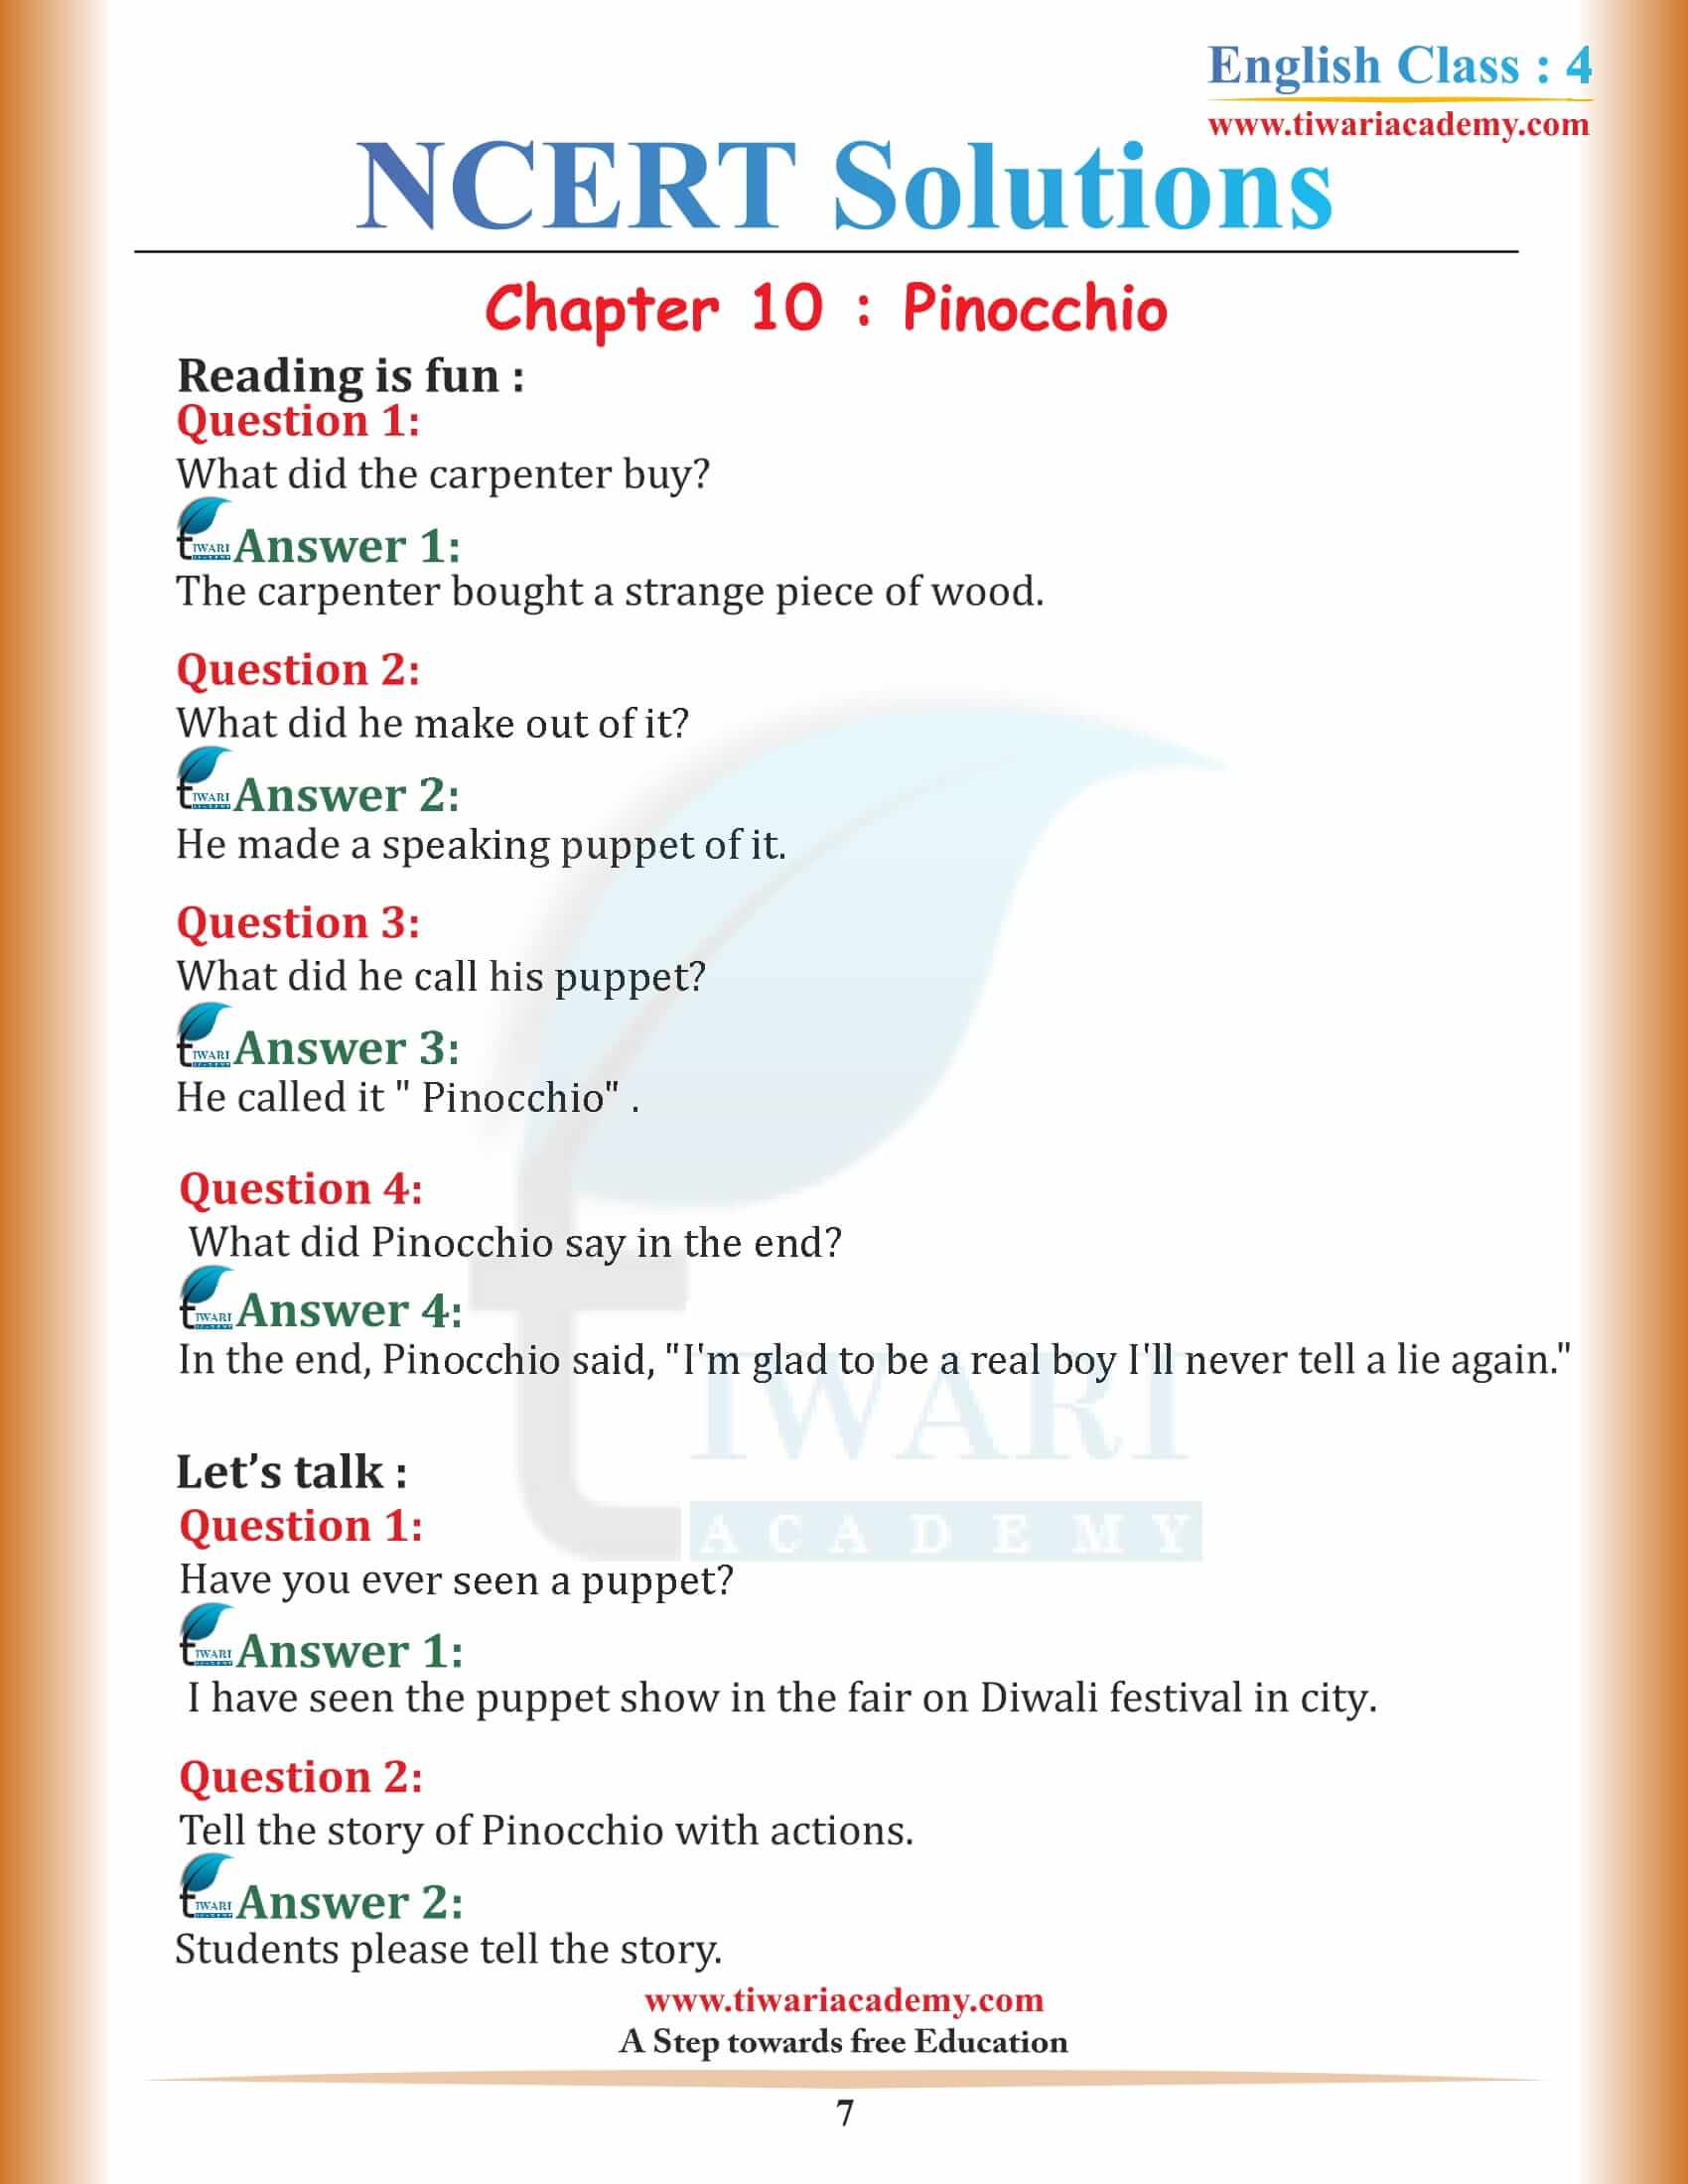 Class 4 NCERT English Book Unit 10 Free download